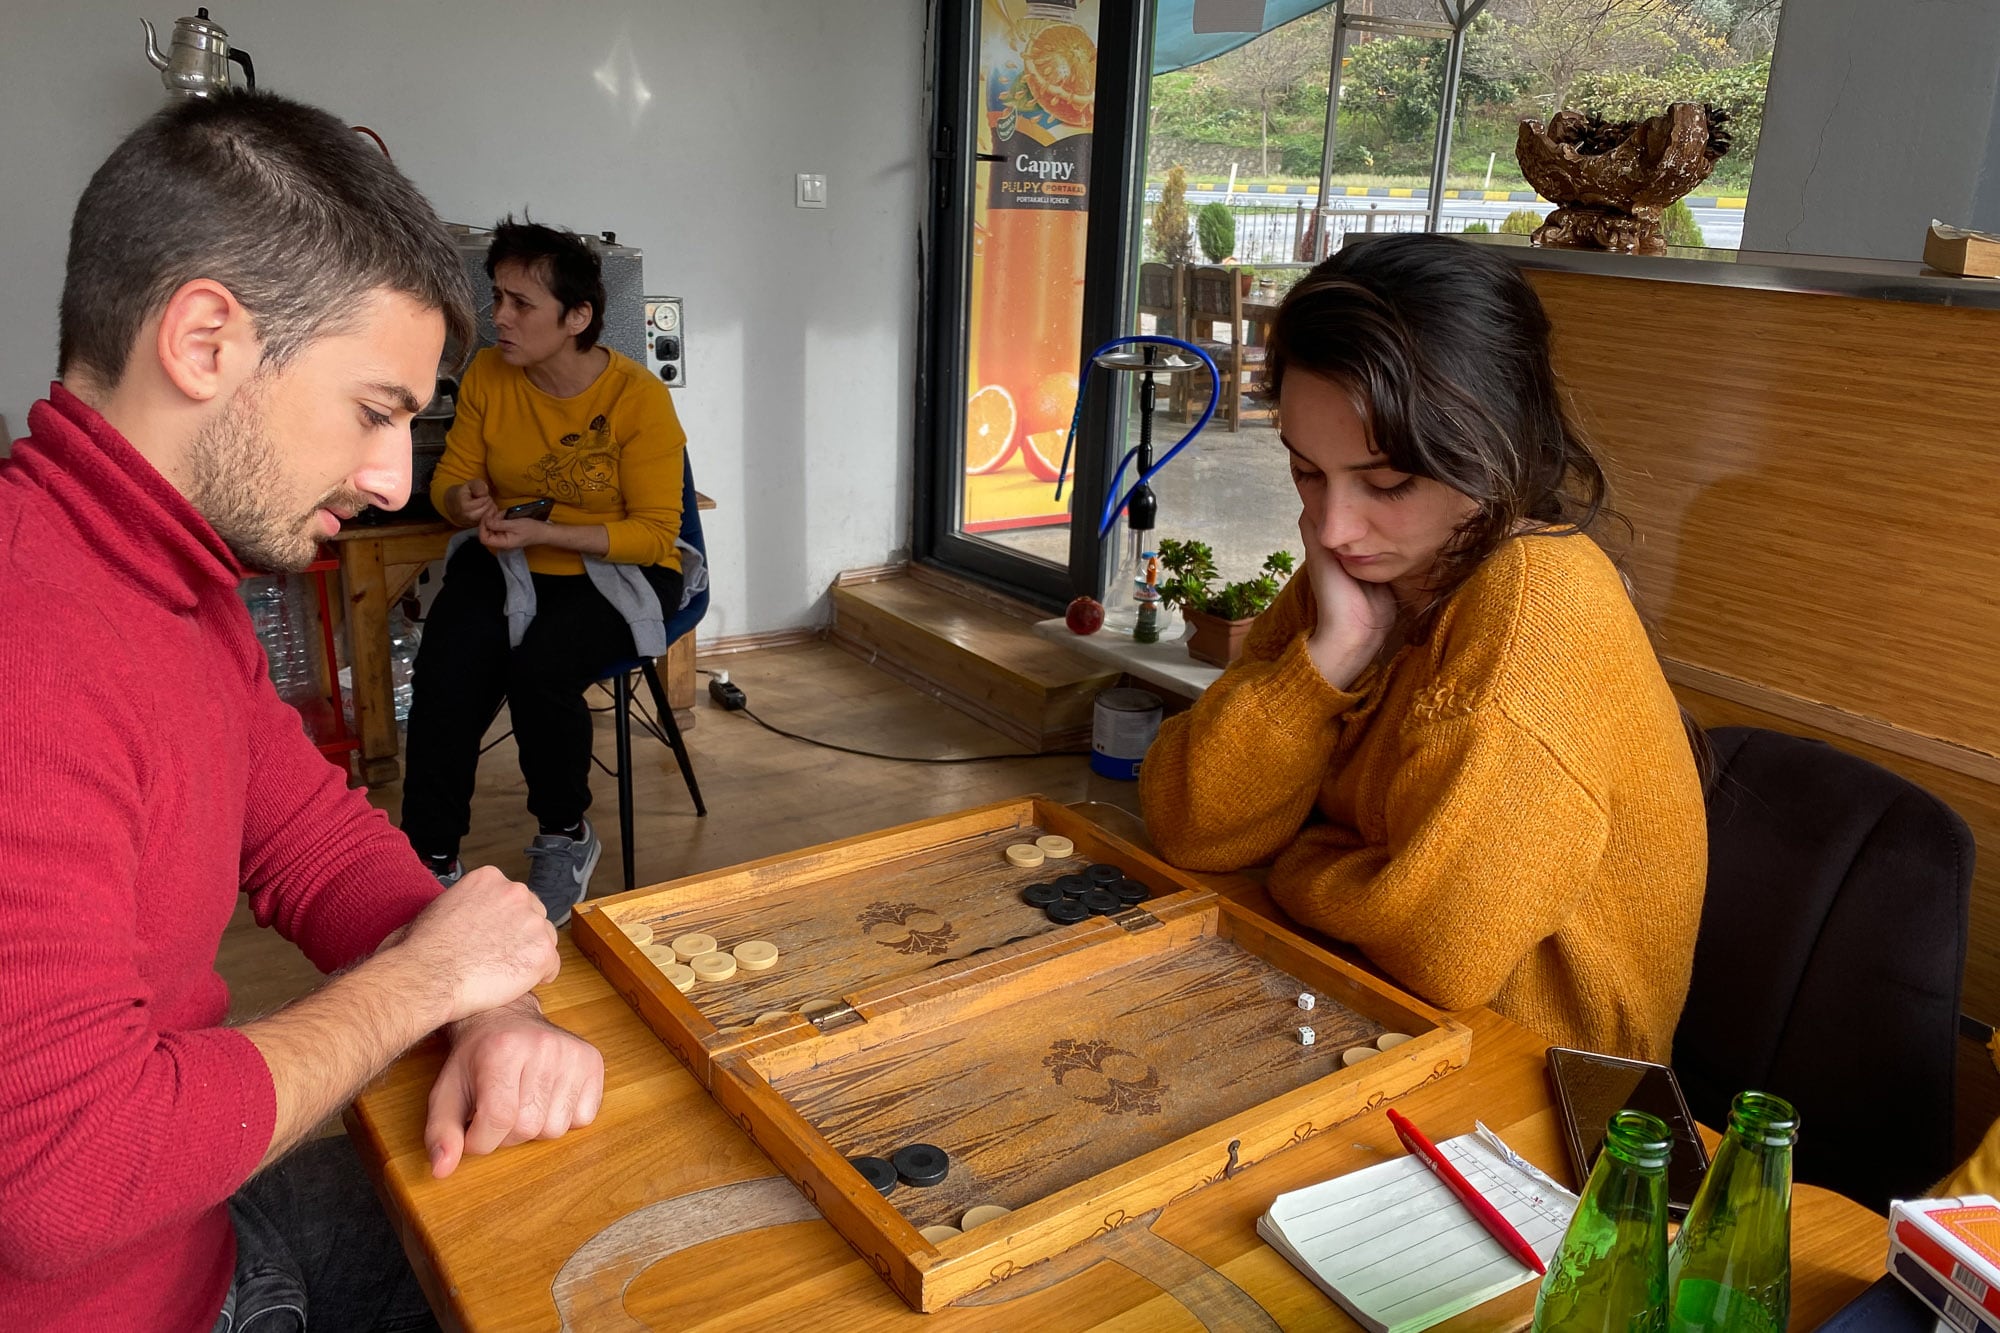 Café owners playing backgammon